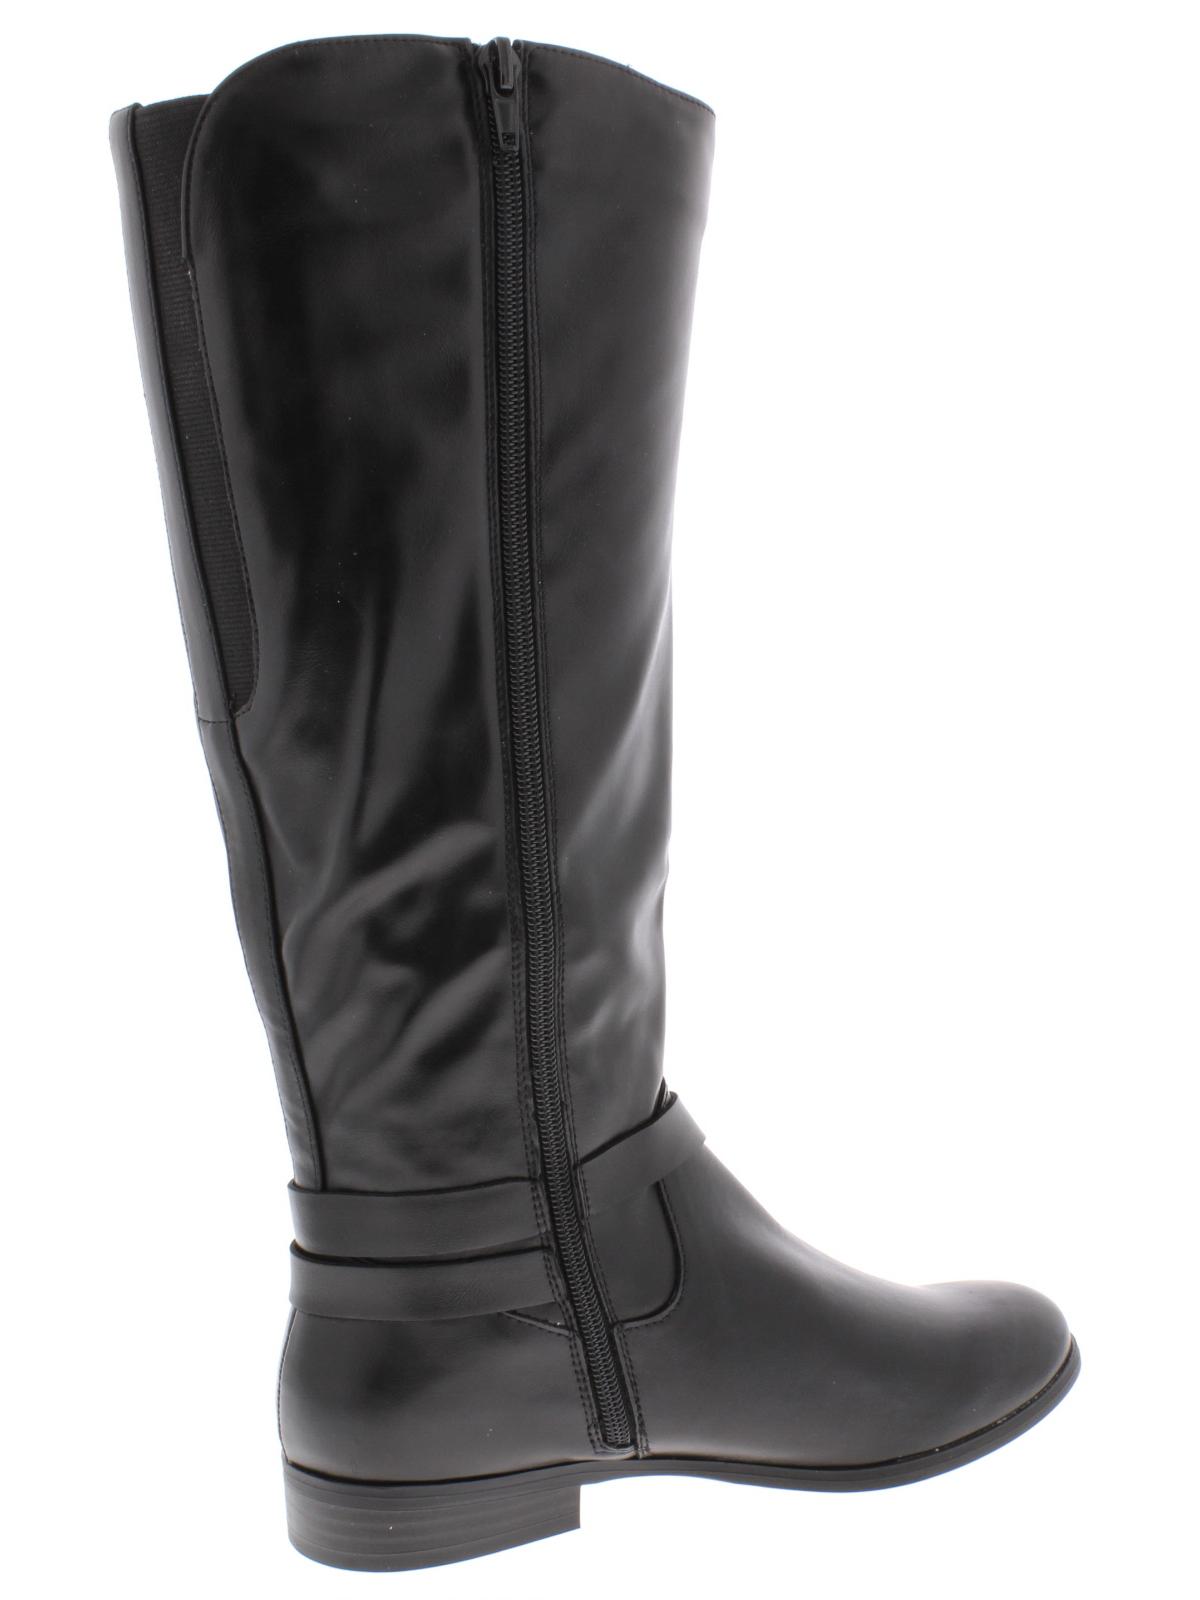 Style & Co Women's Kindell Faux Leather Riding Boots Black Size 6.5 M - image 2 of 2